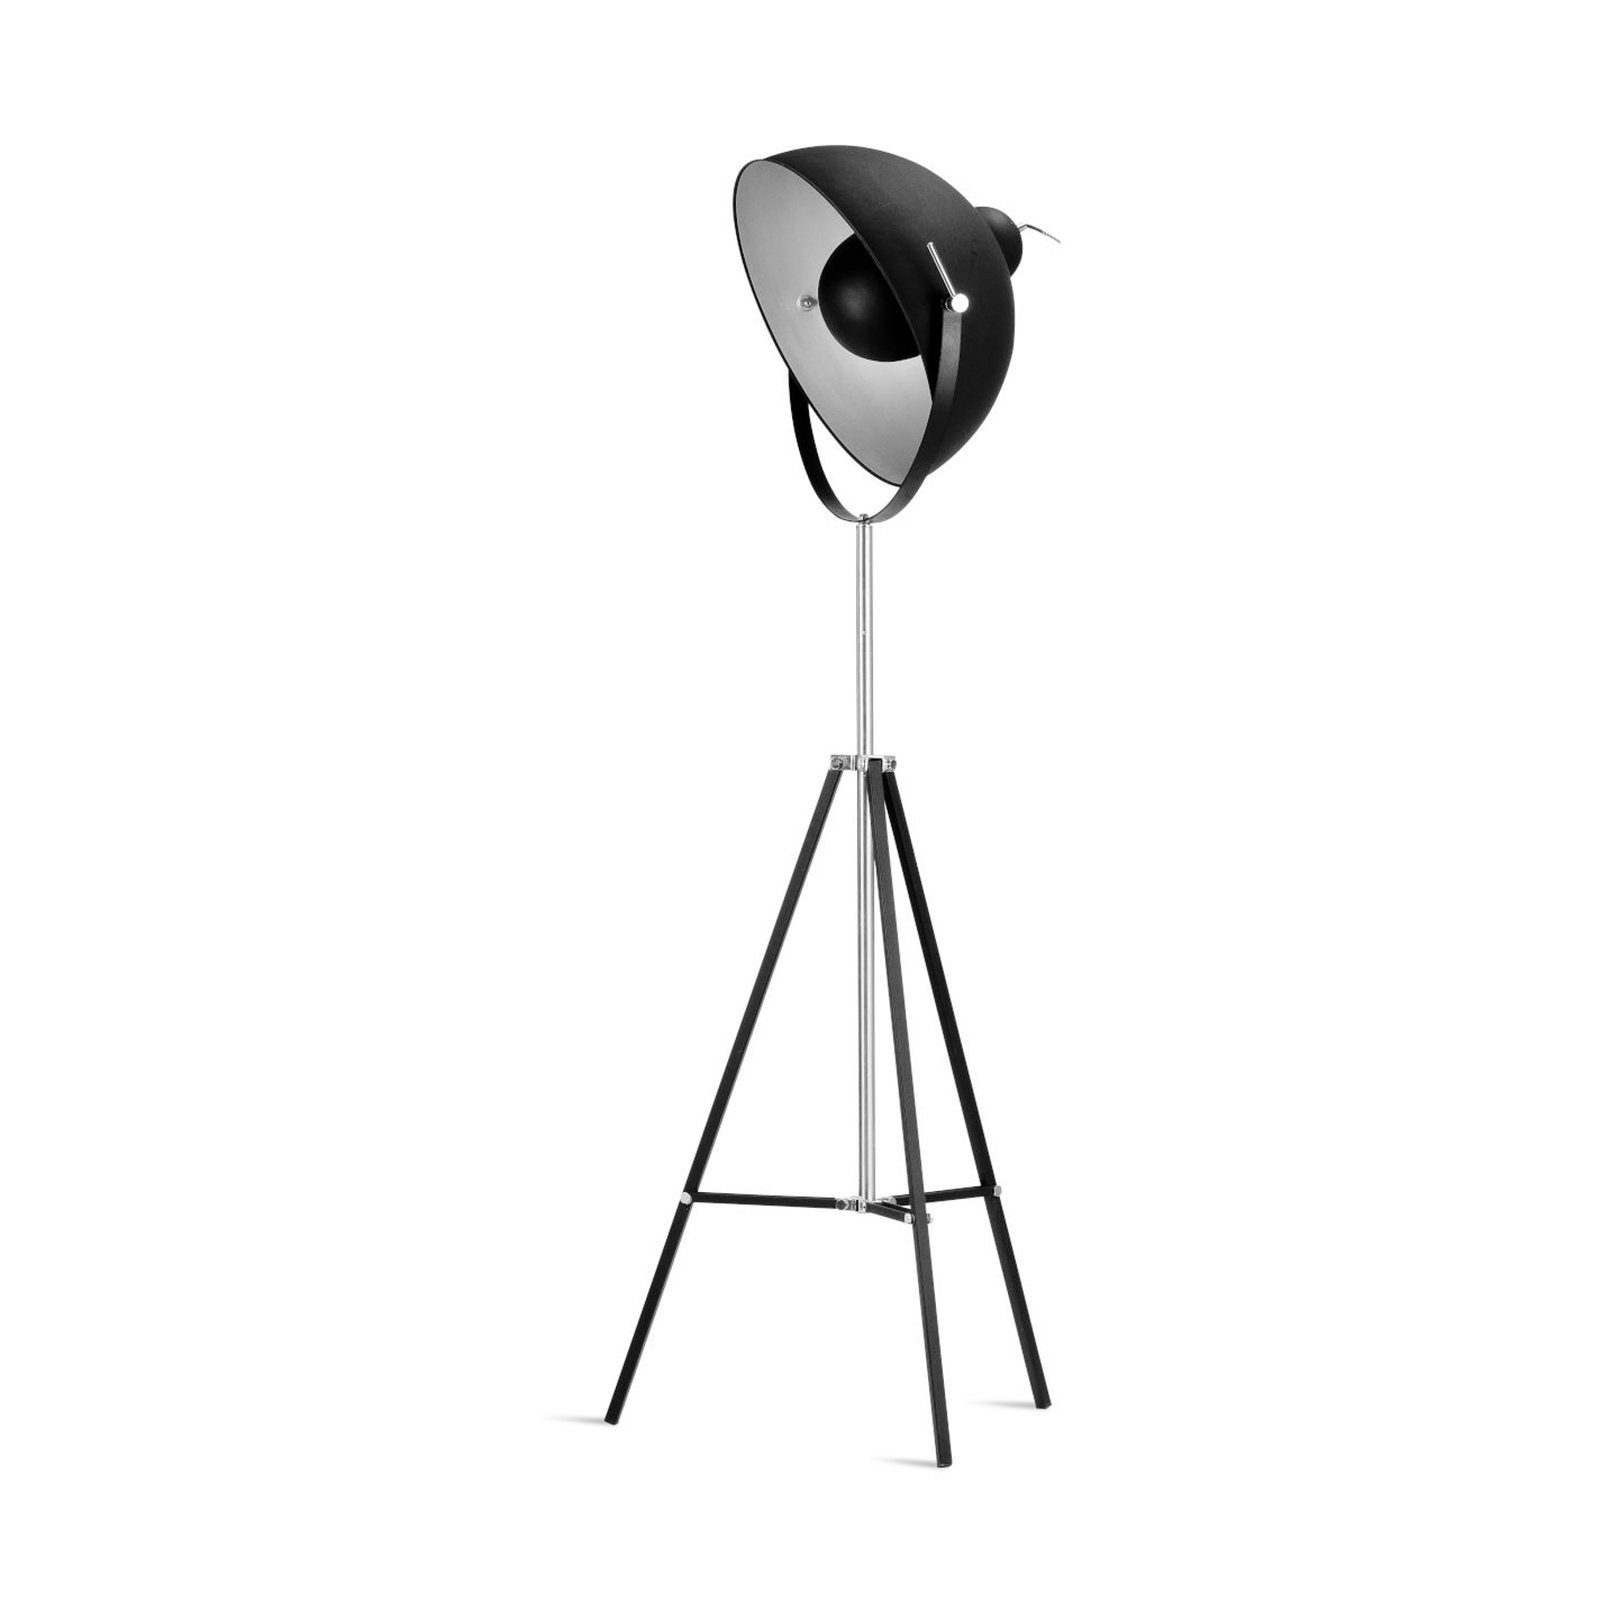 It’s about RoMi Hollywood tripod light, black